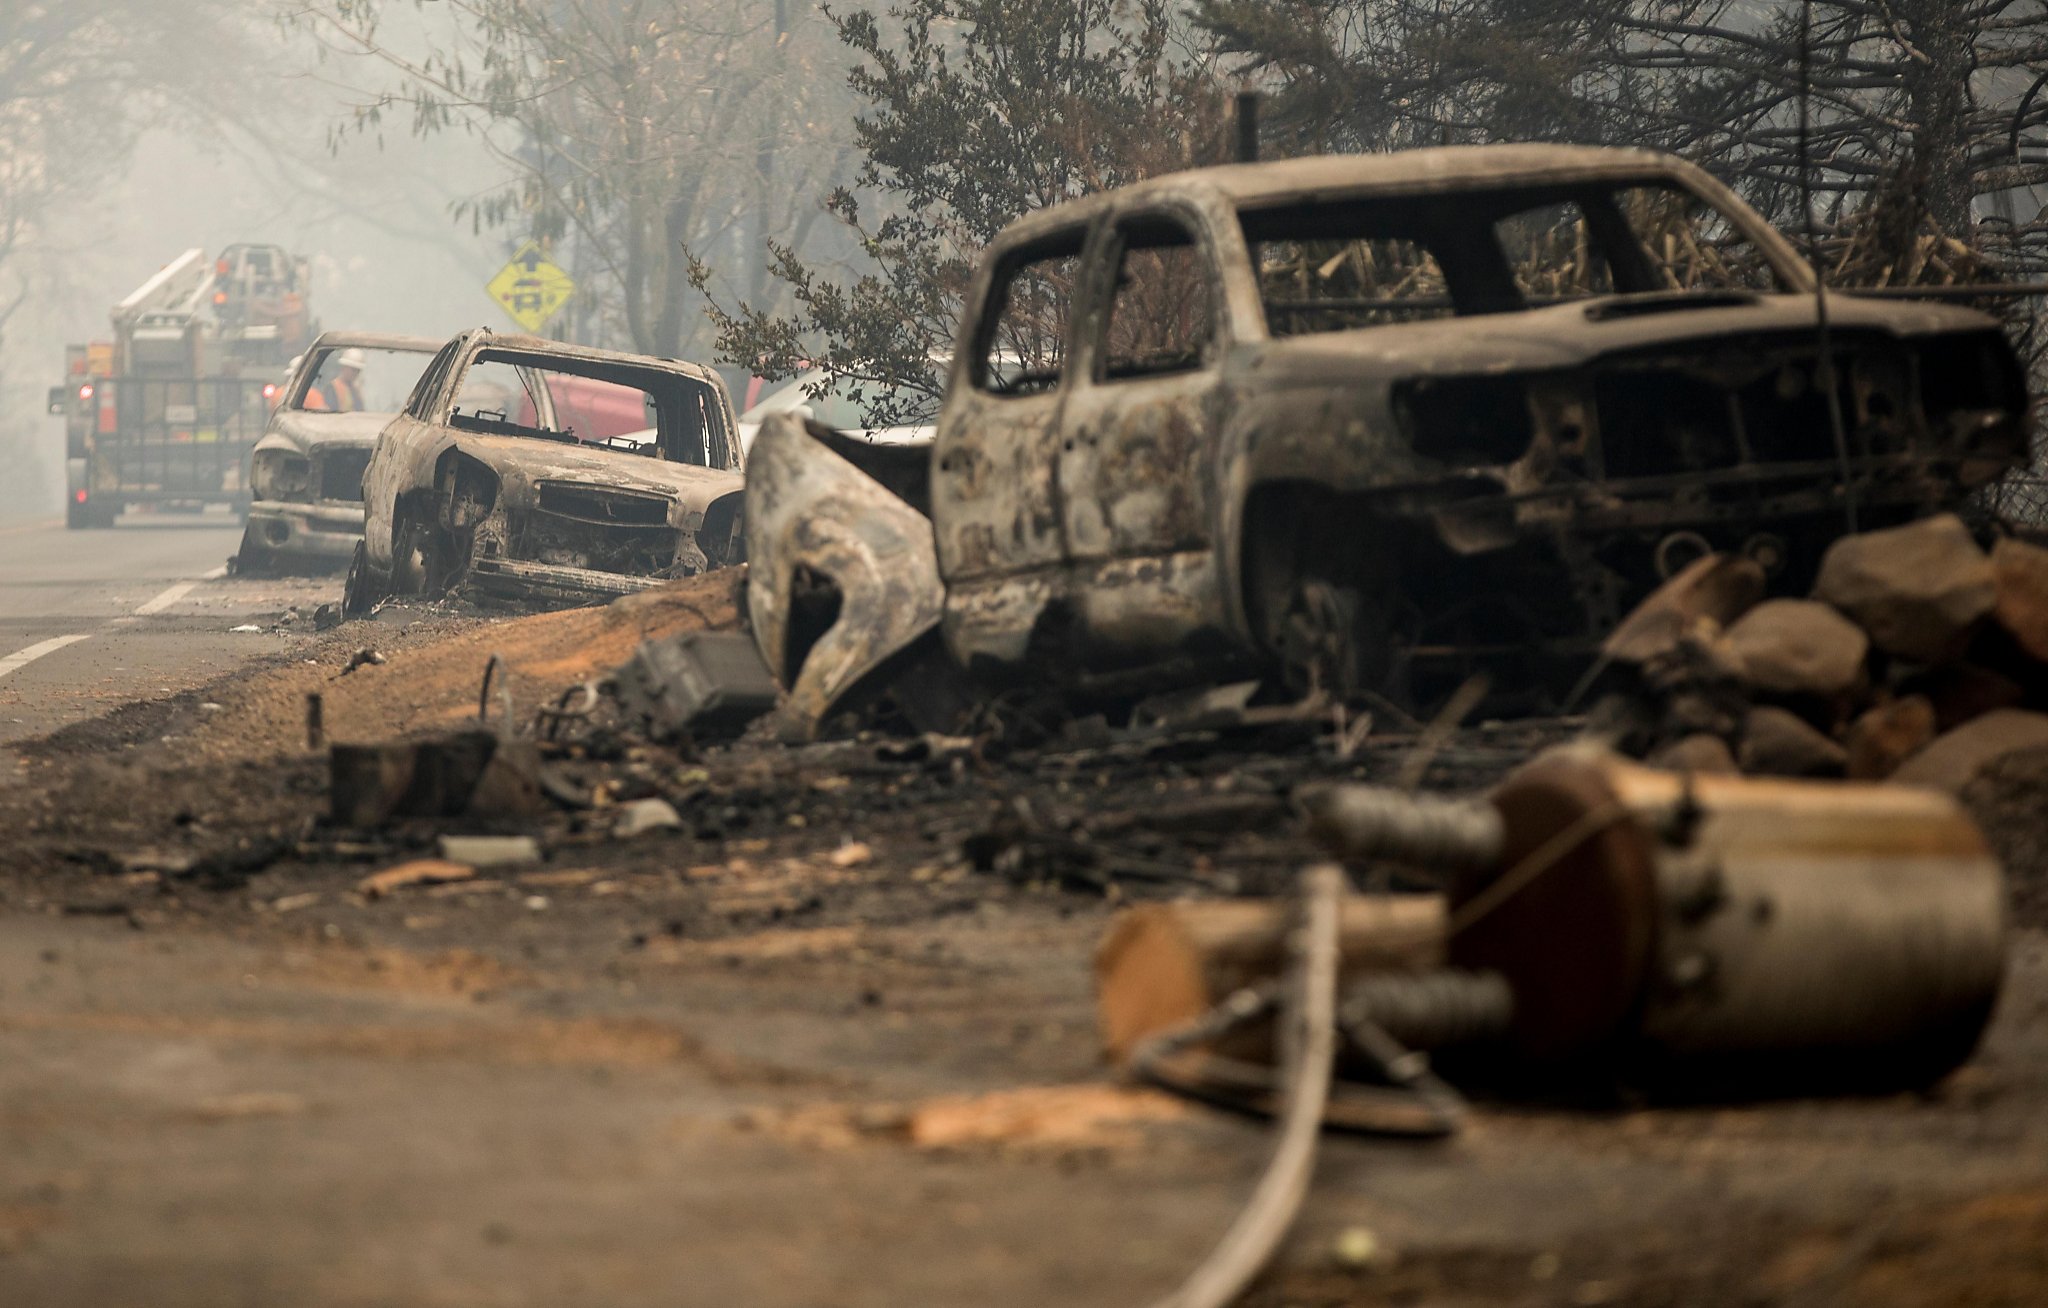 Camp Fire: Death toll grows to 71, missing list grows to 1,011 - SFChronicle.com